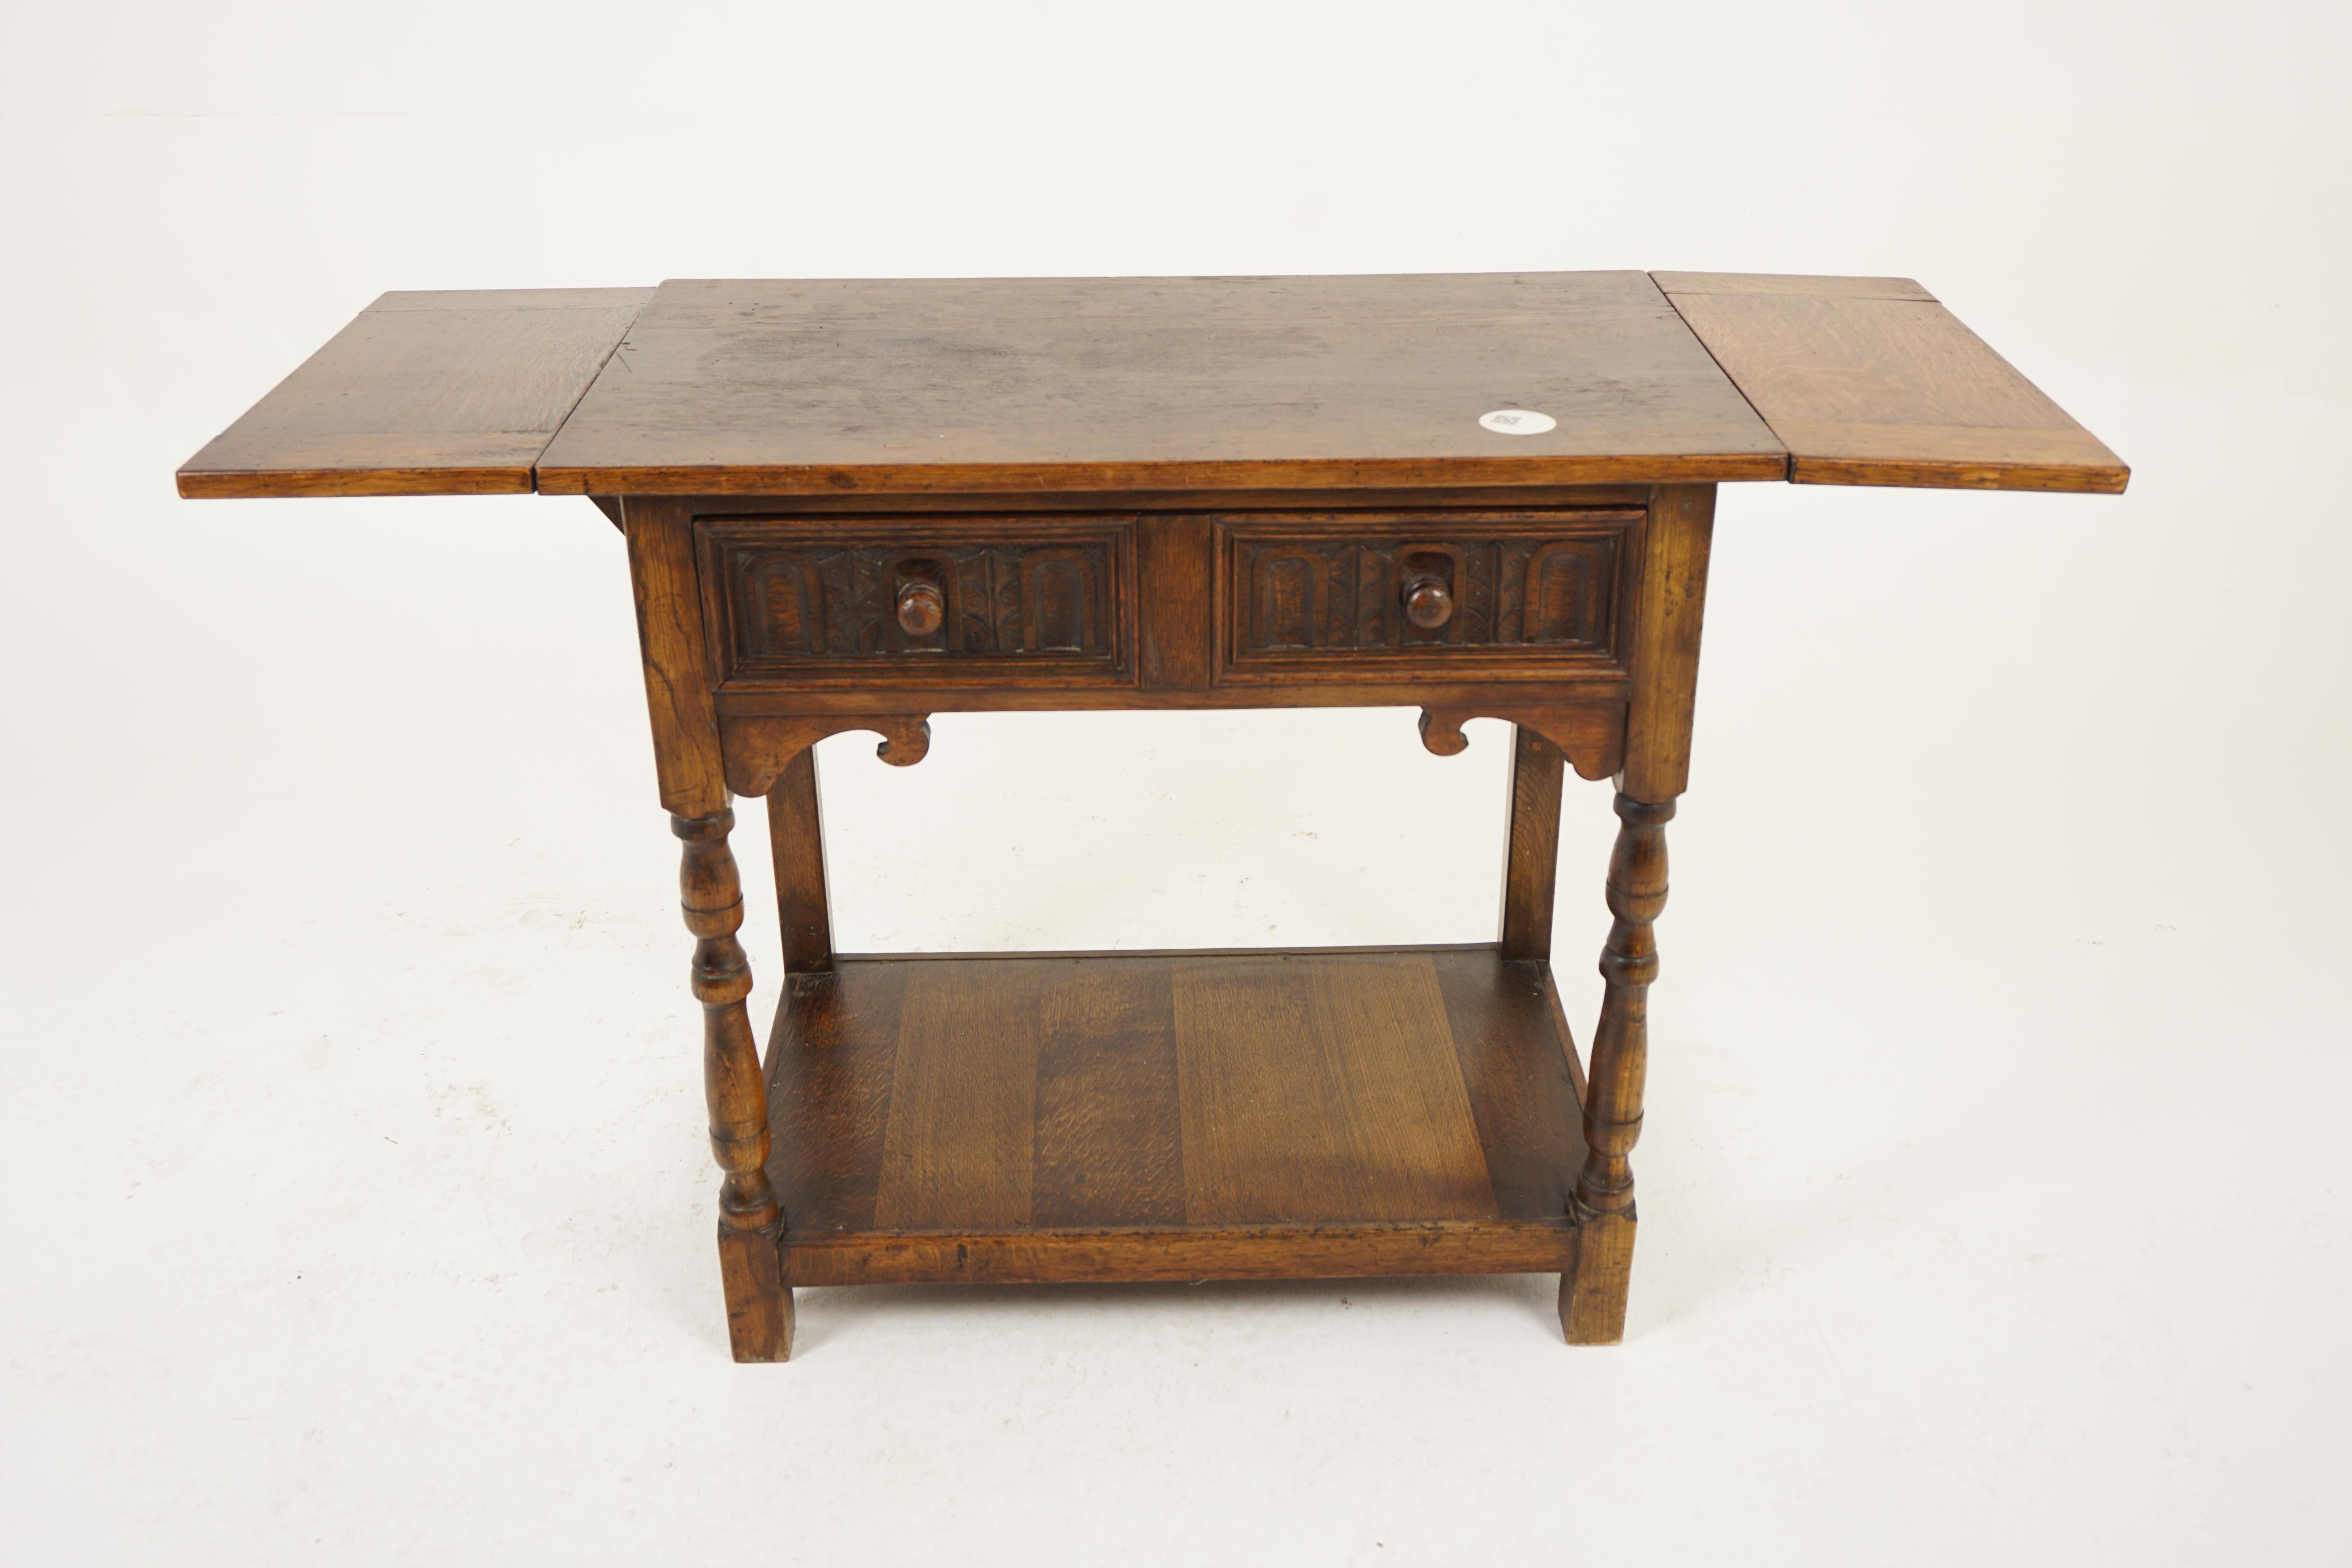 Hand-Crafted Antique Oak Table, Serving Table with Leaves, Hall Table, Scotland 1930, H1053